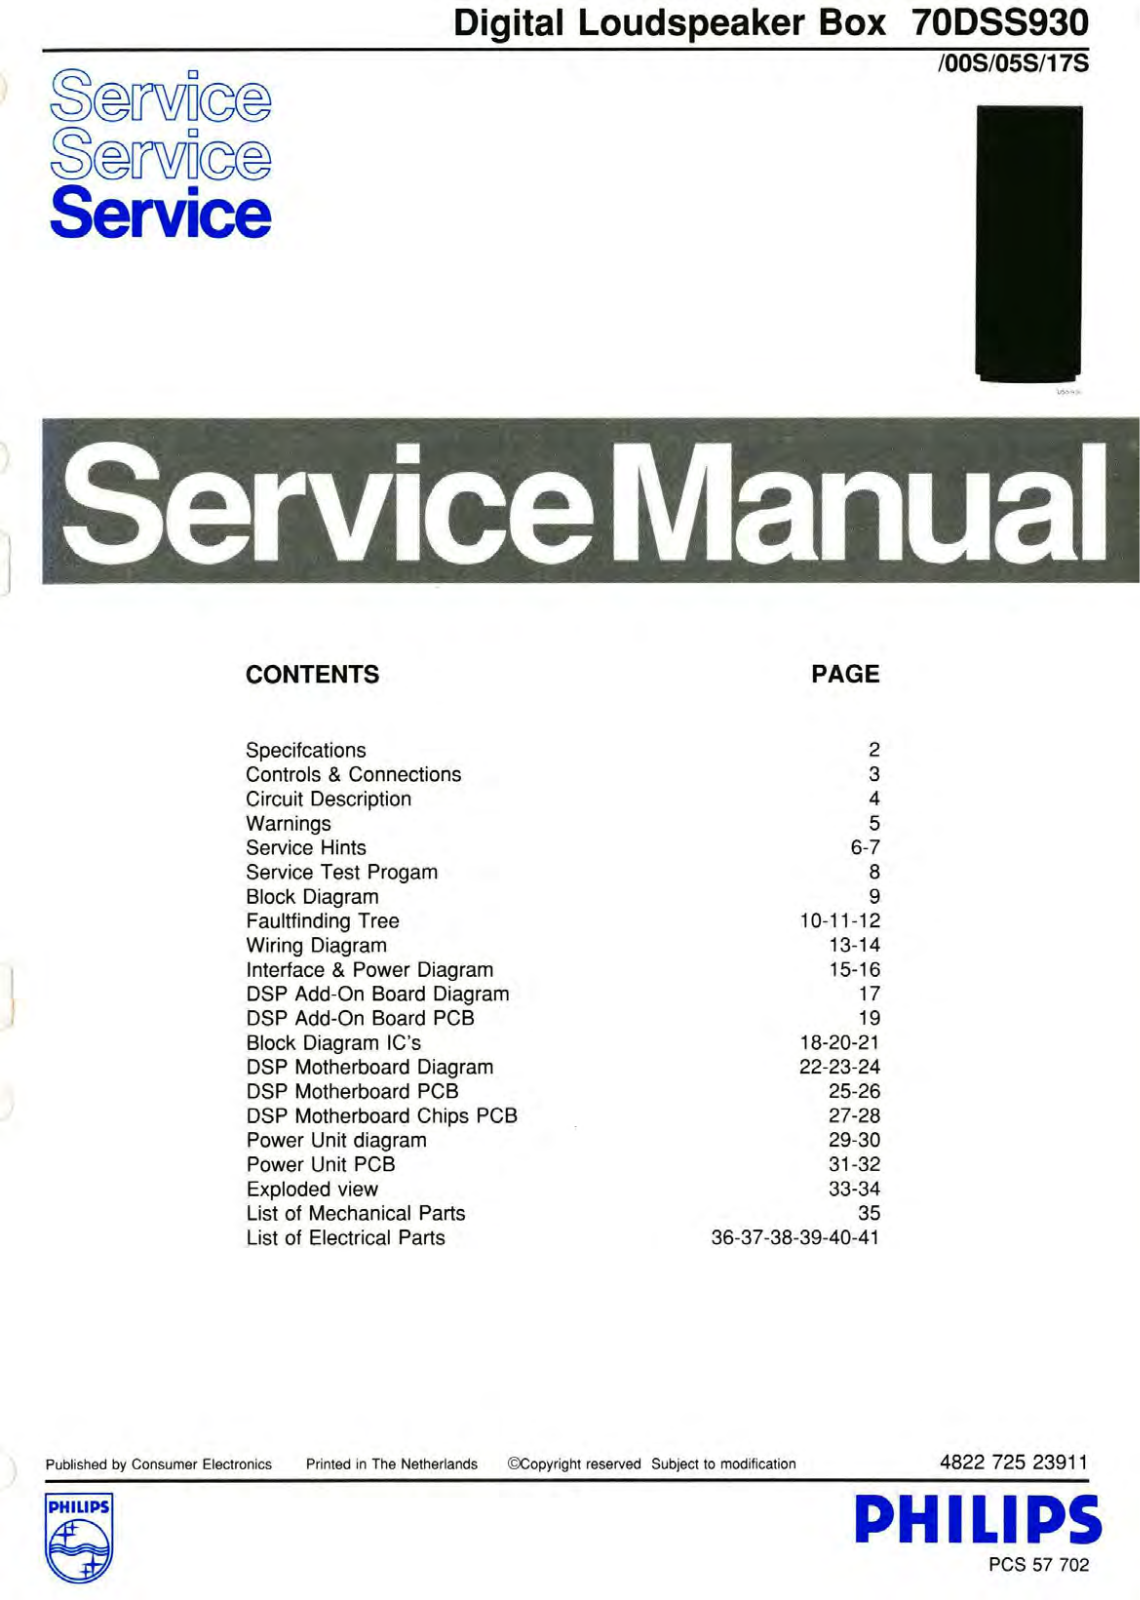 Philips 70-DSS-930 Service Manual